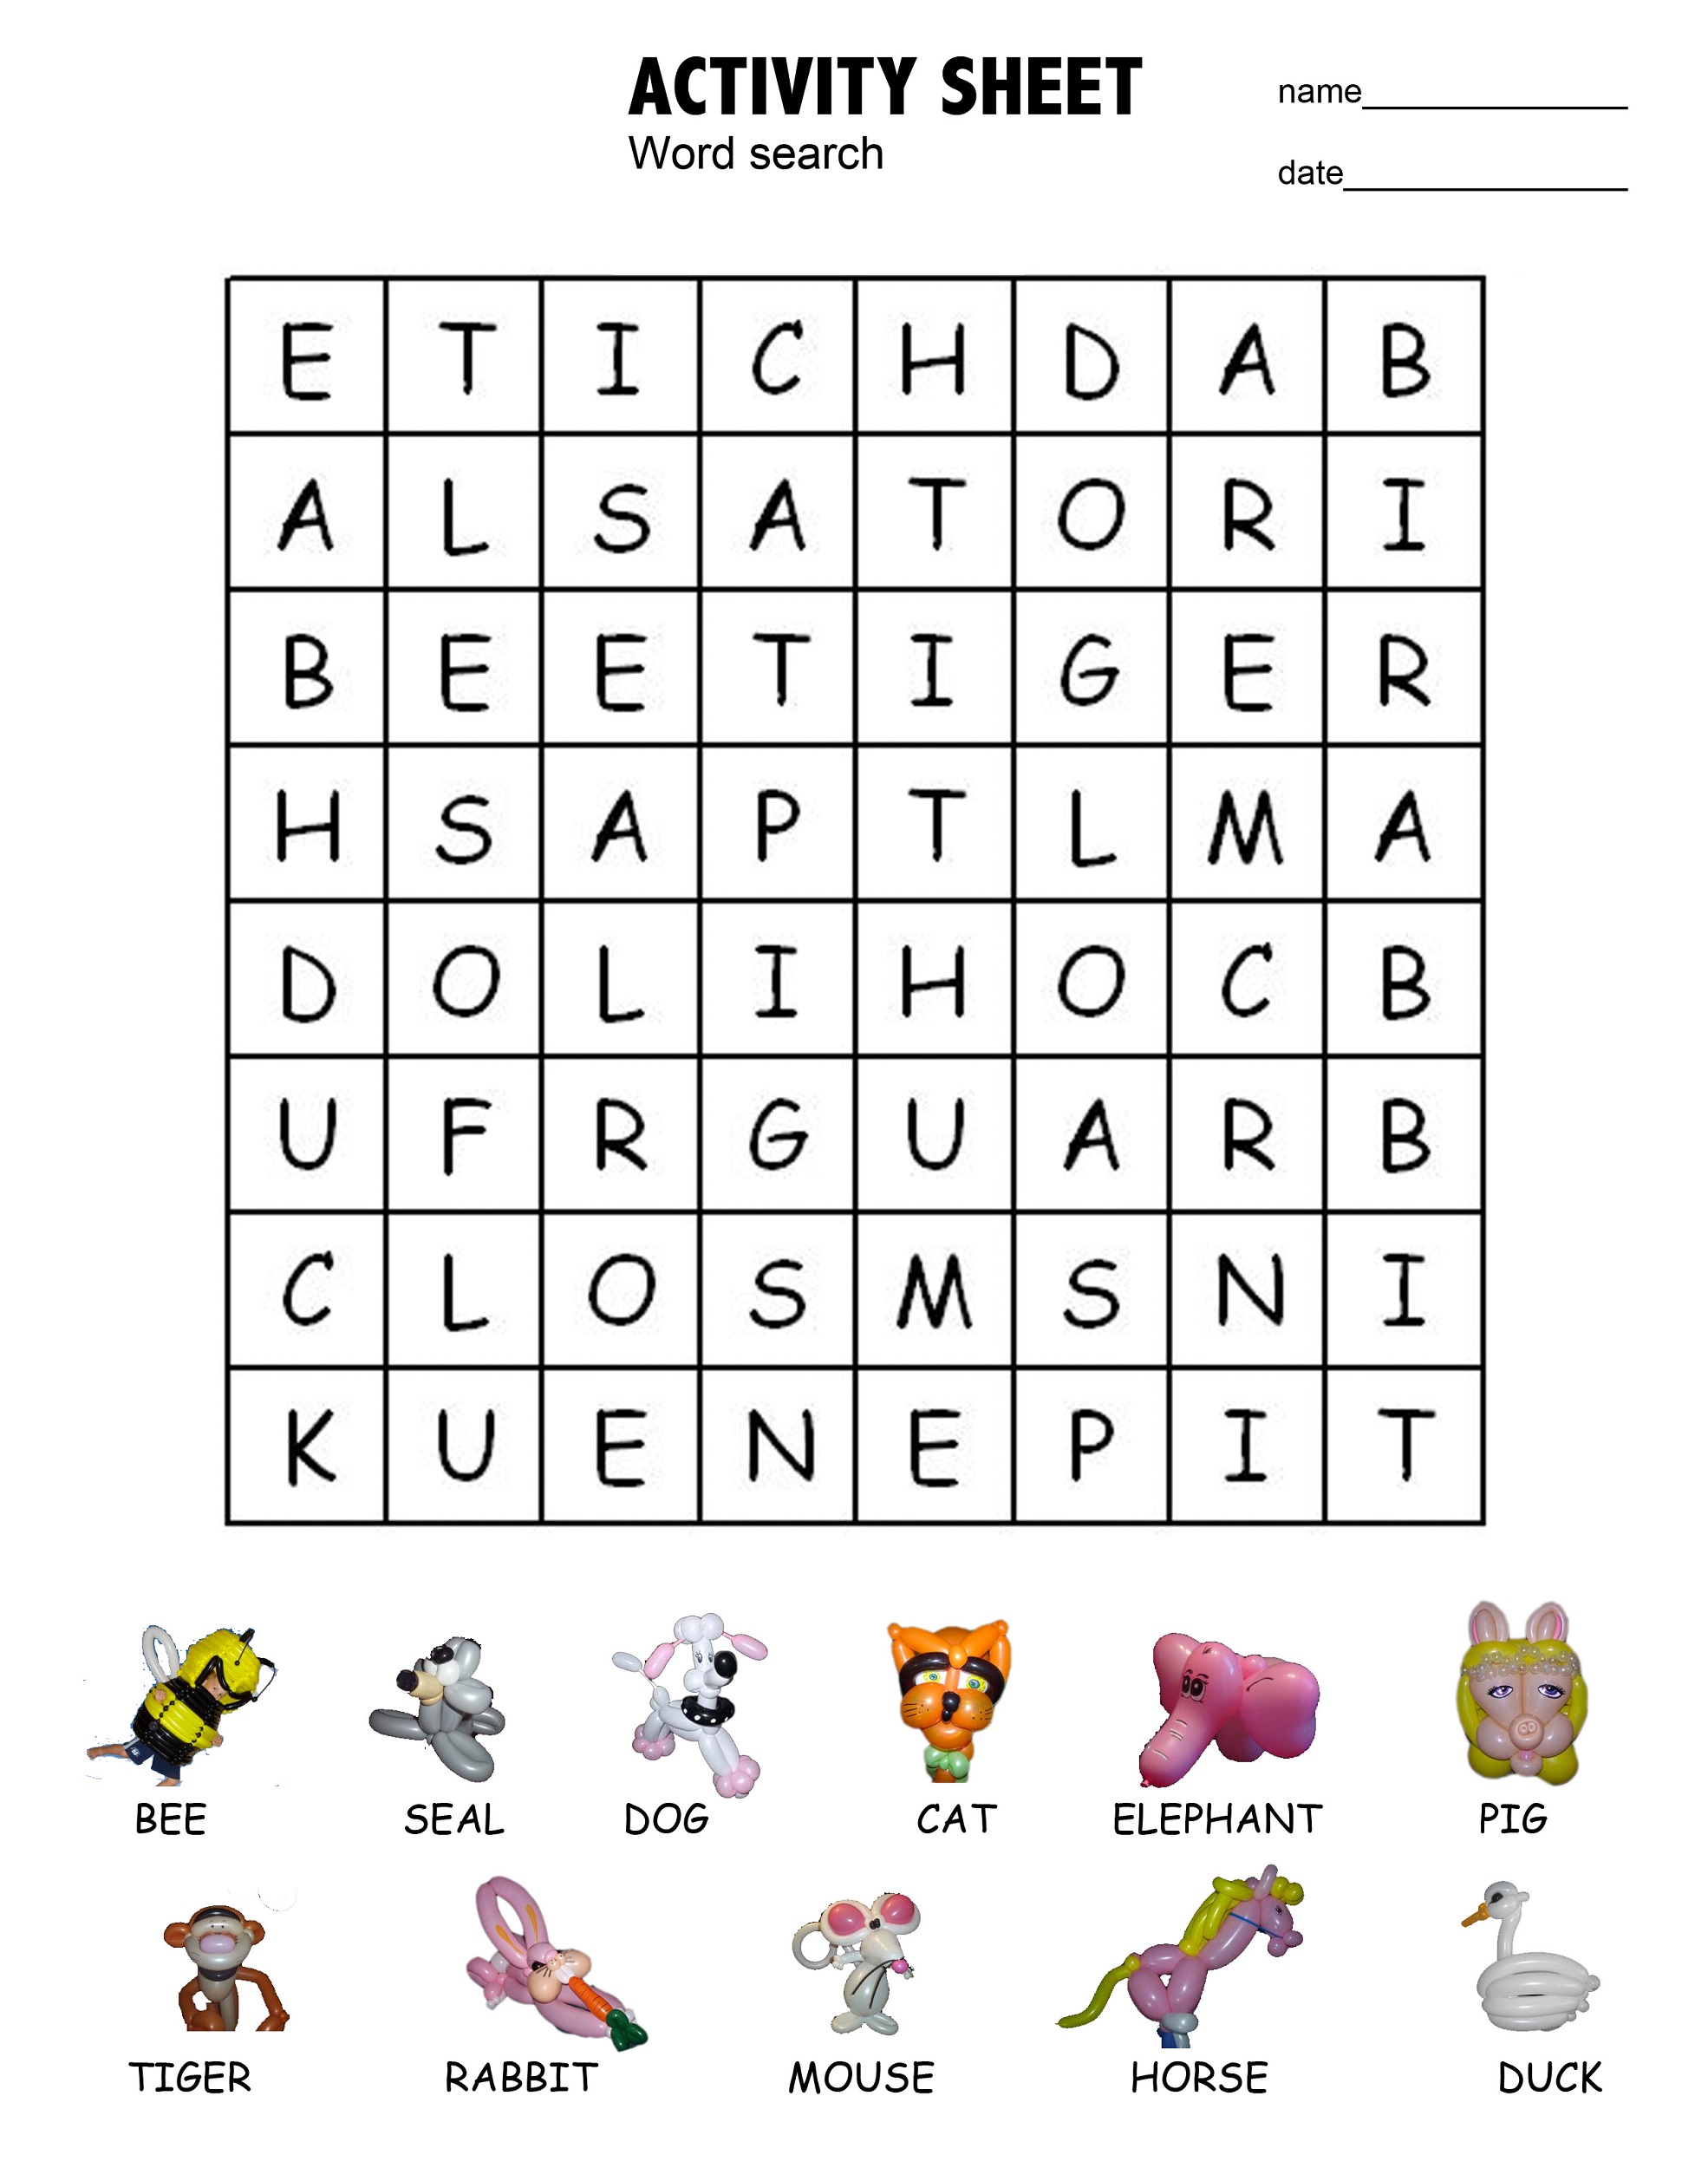 zoo-animals-word-search-puzzle-puzzles-to-play